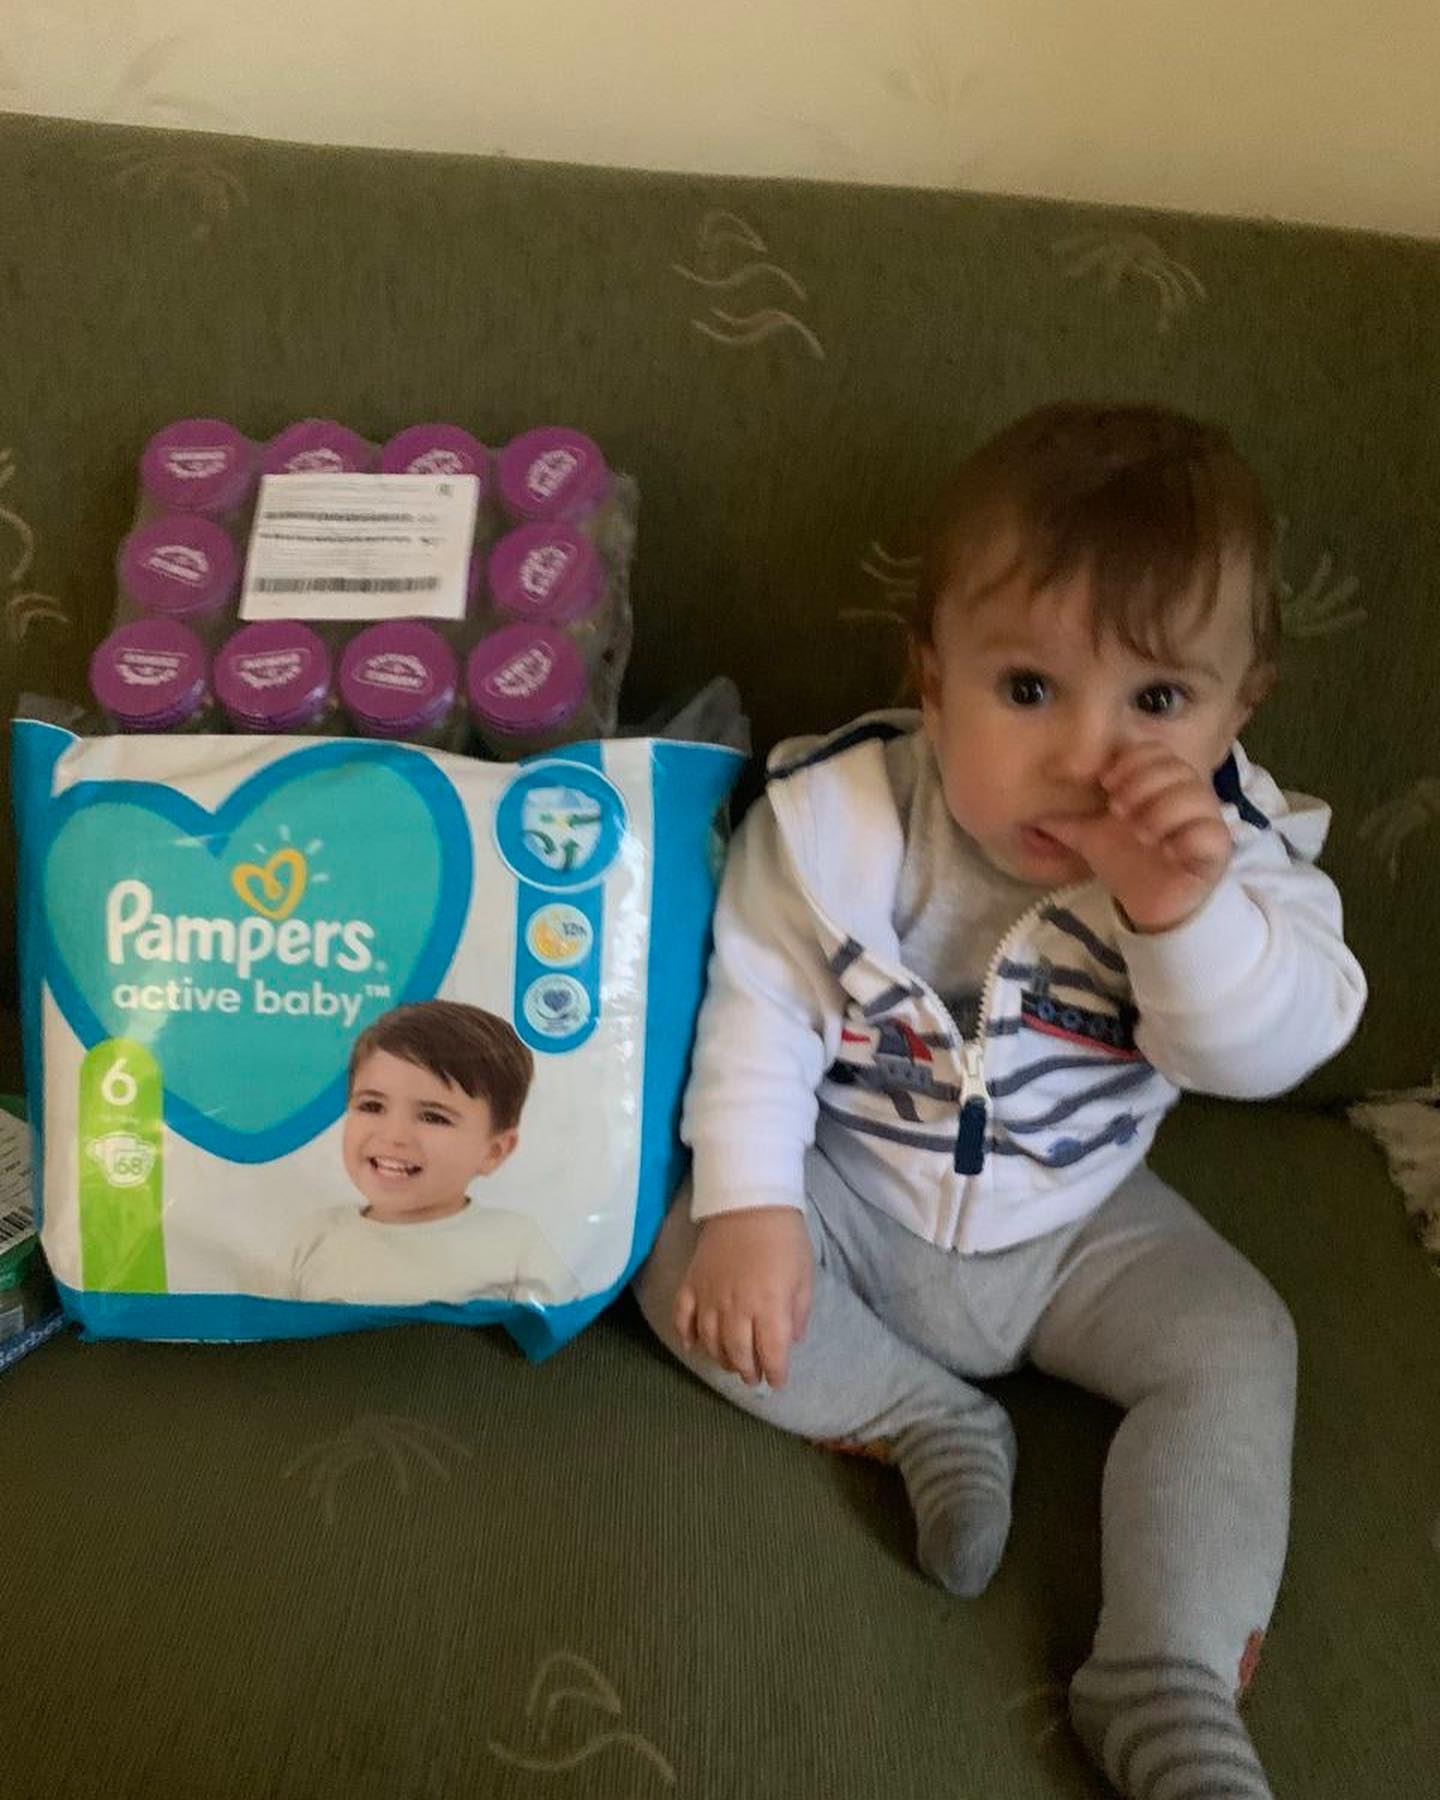 A baby sits on a couch next to a box of pampers diapers.